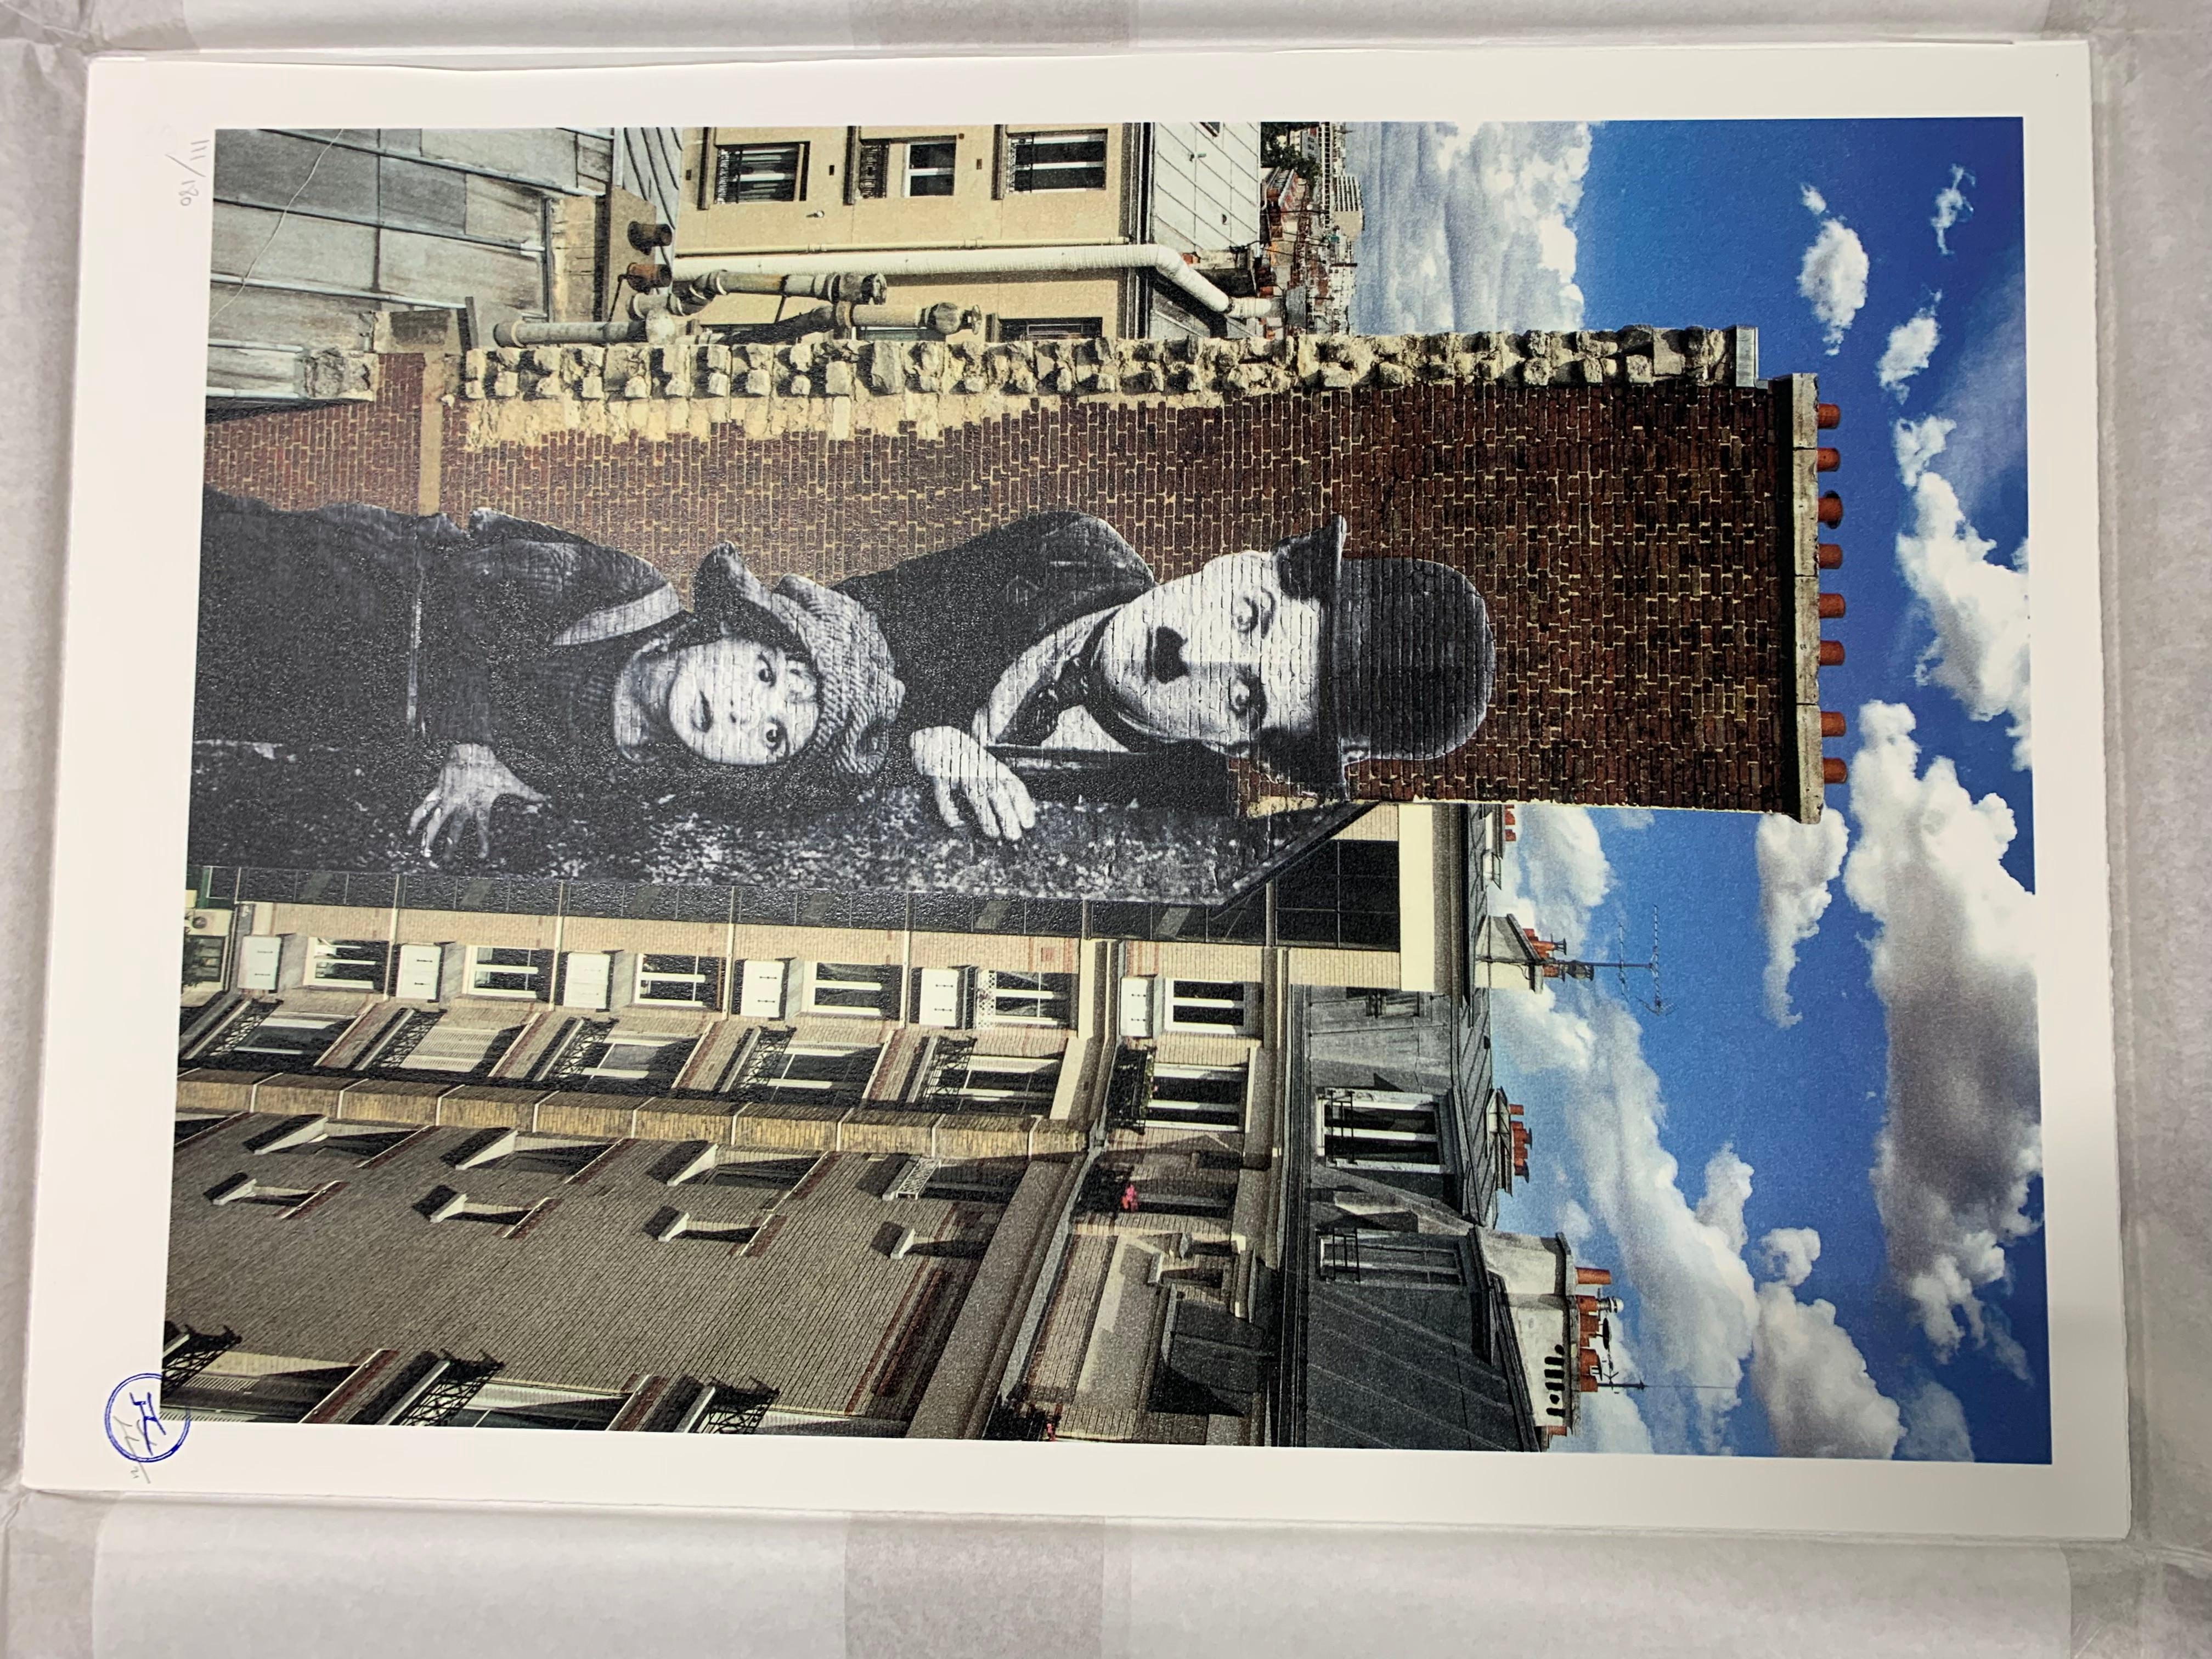 From street artist and photographer JR, this artpiece depicts Charlie Chaplin in the legendary scene from 